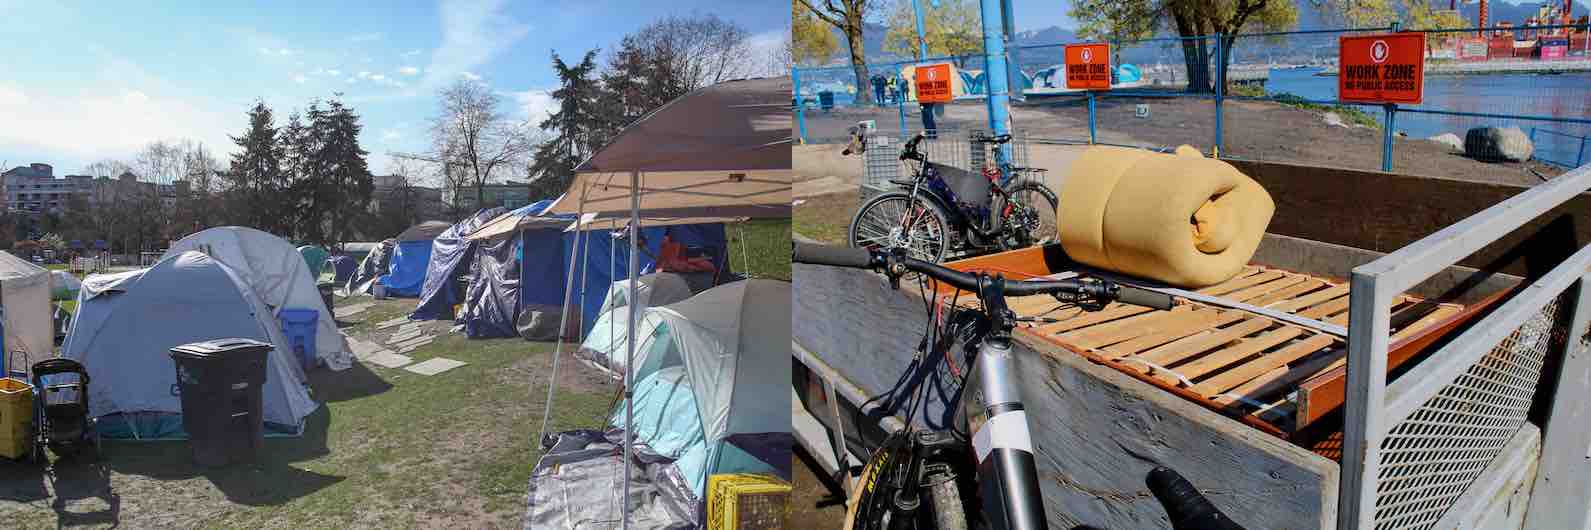 Two photos side by side. On the left, about a dozen tents, some covered by tarps, on a stretch of patchy grass. On the right, a foam mattress and wooden platform are in a container.